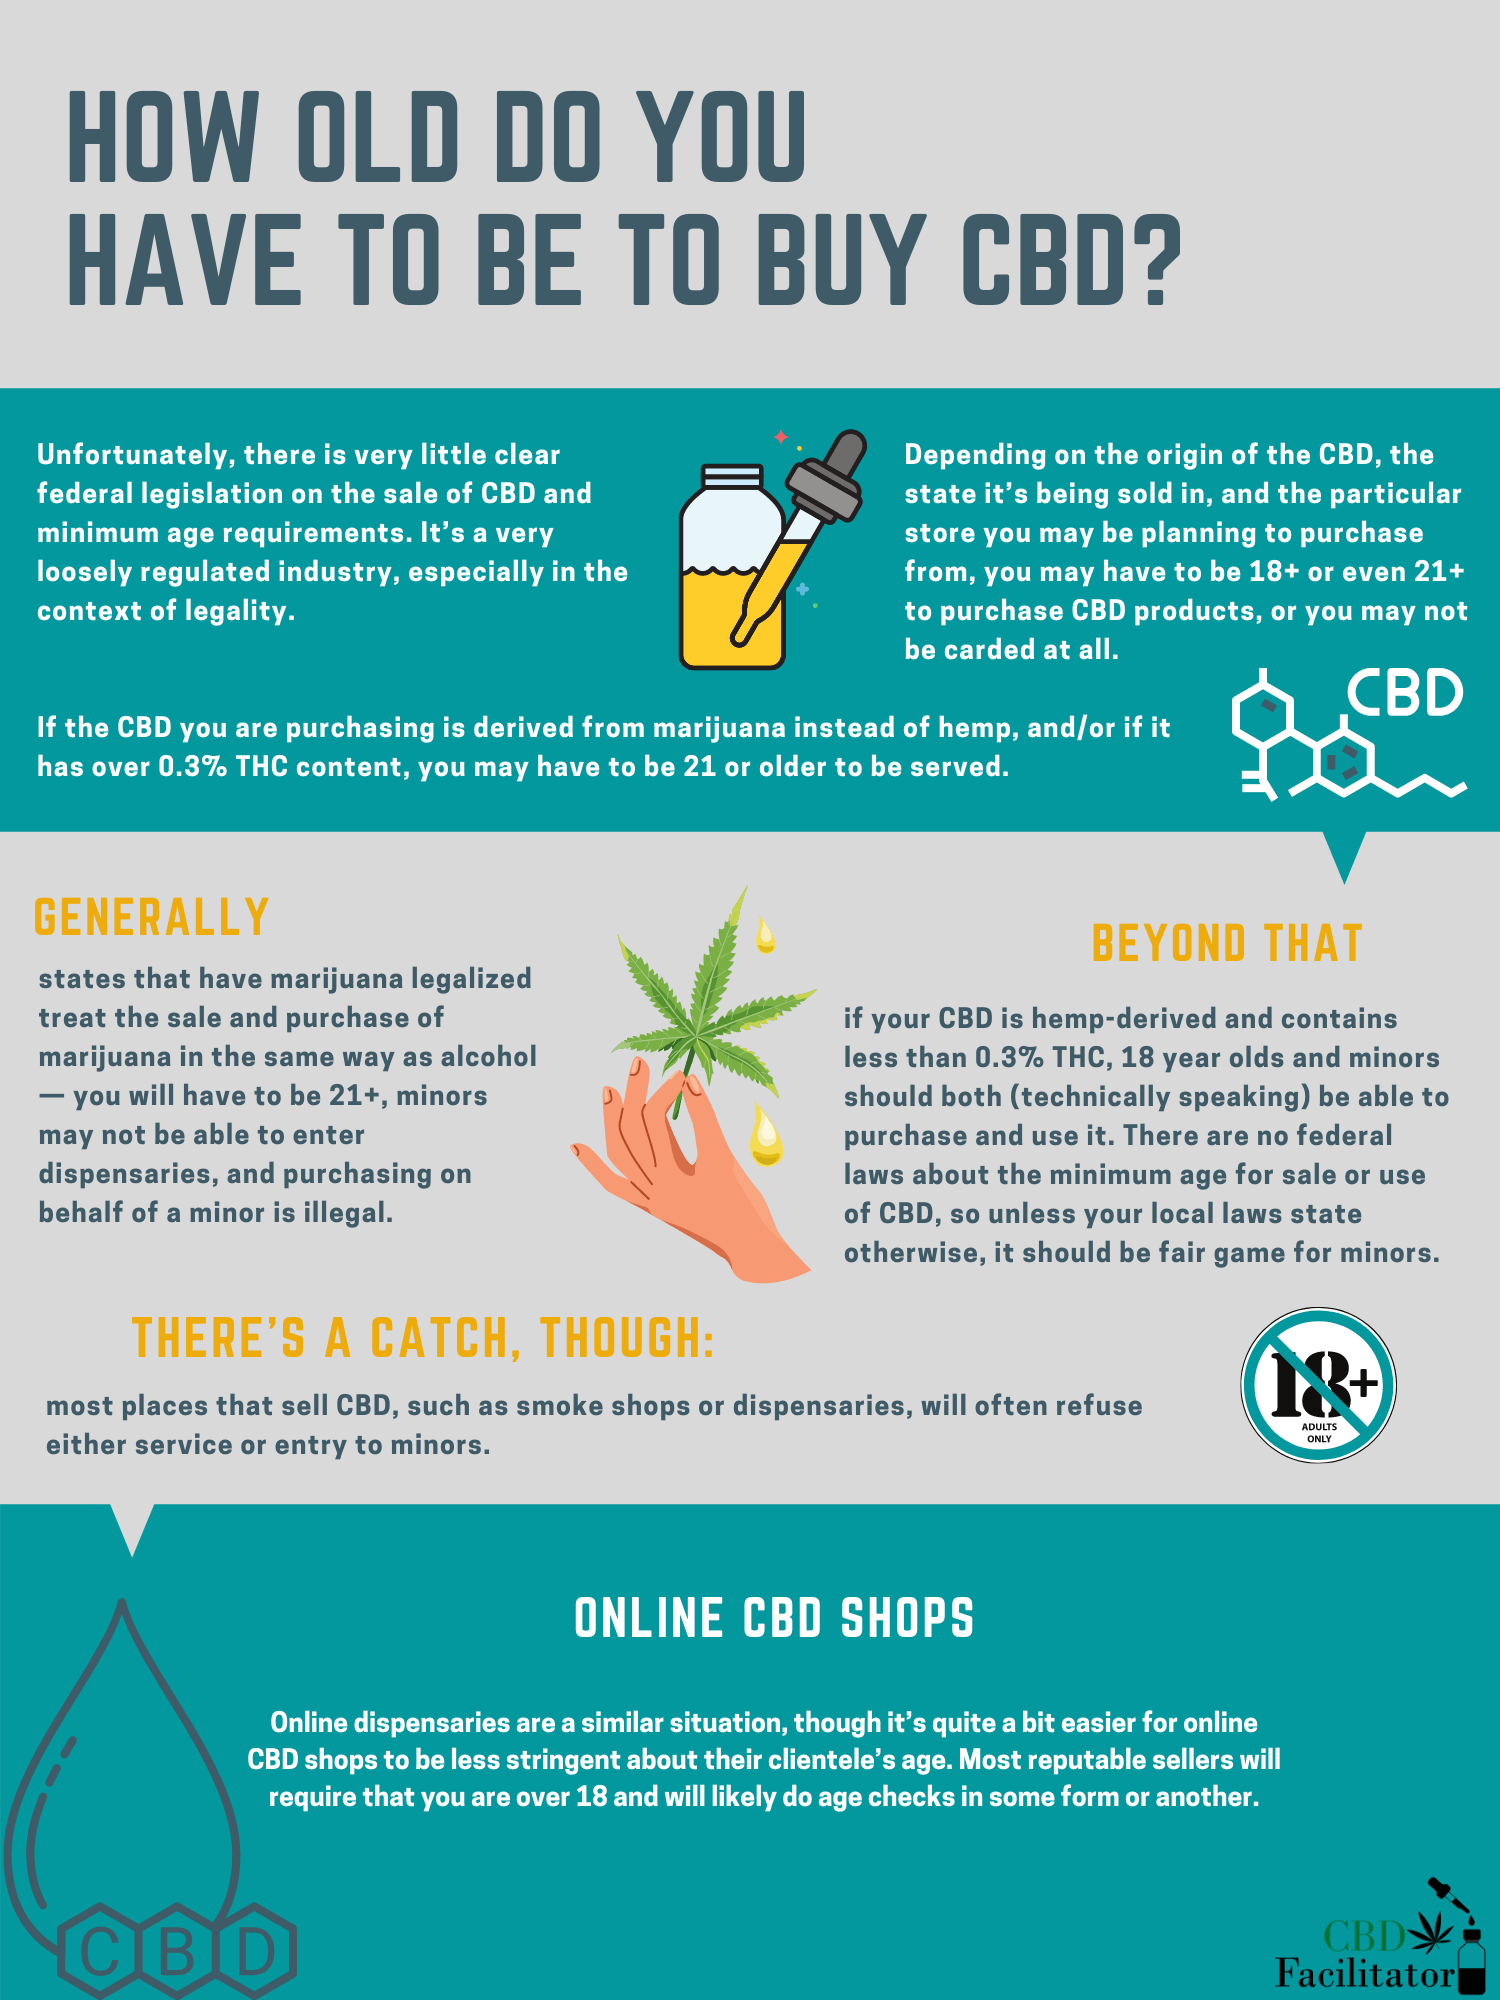 Infographic summarizing the article How old do you have to be to buy CBD.